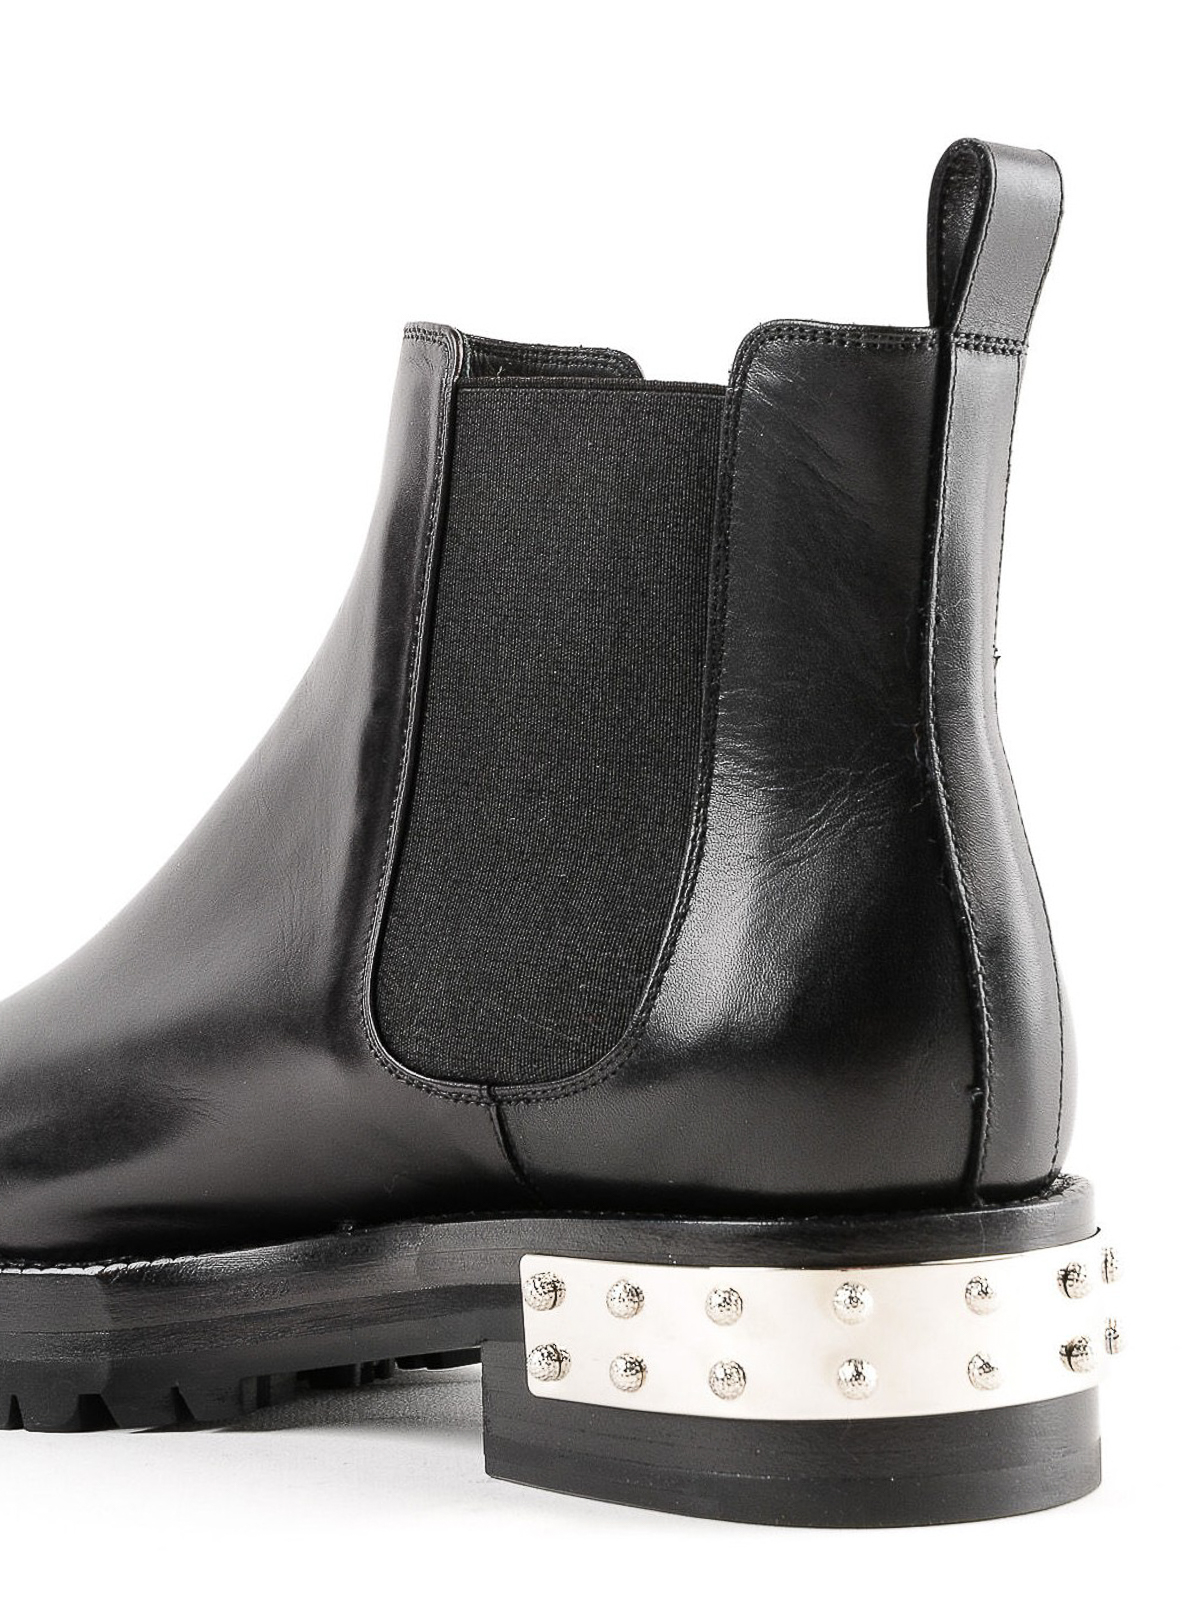 Ankle boots Alexander Mcqueen - Mod black leather booties 